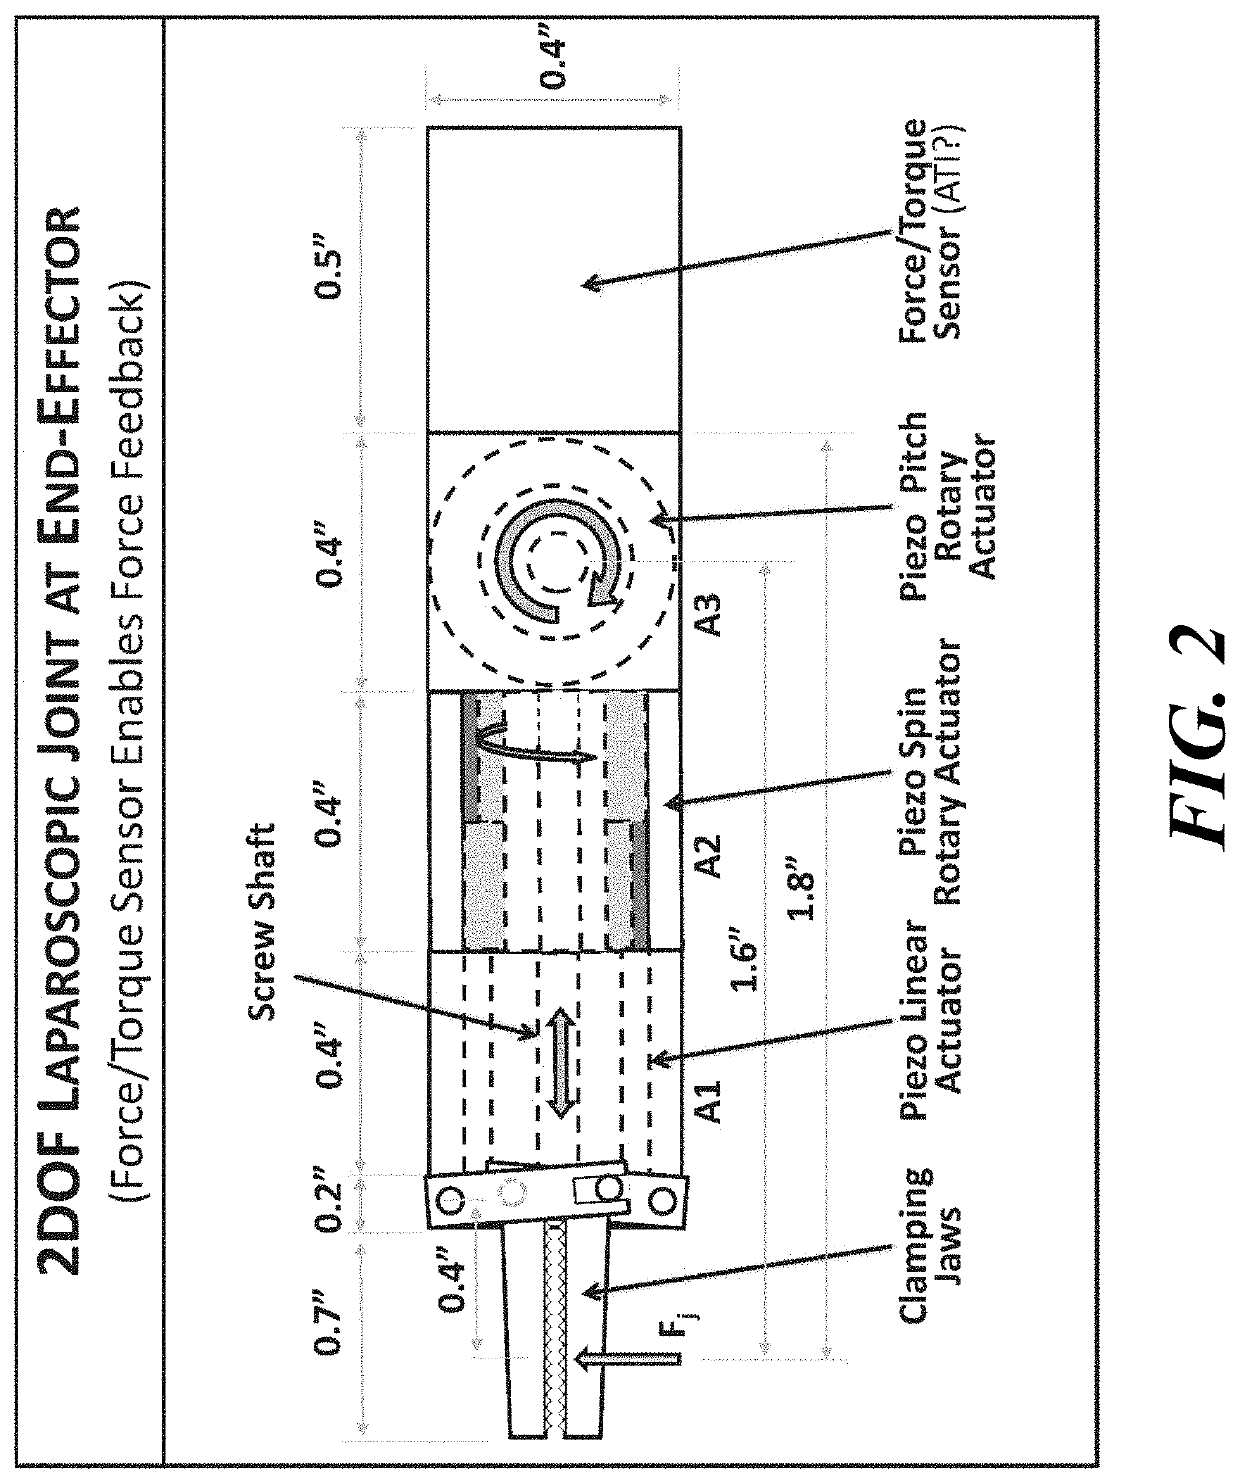 Actuator with a parallel eccentric gear train driven by a mechanically amplified piezoelectric assembly